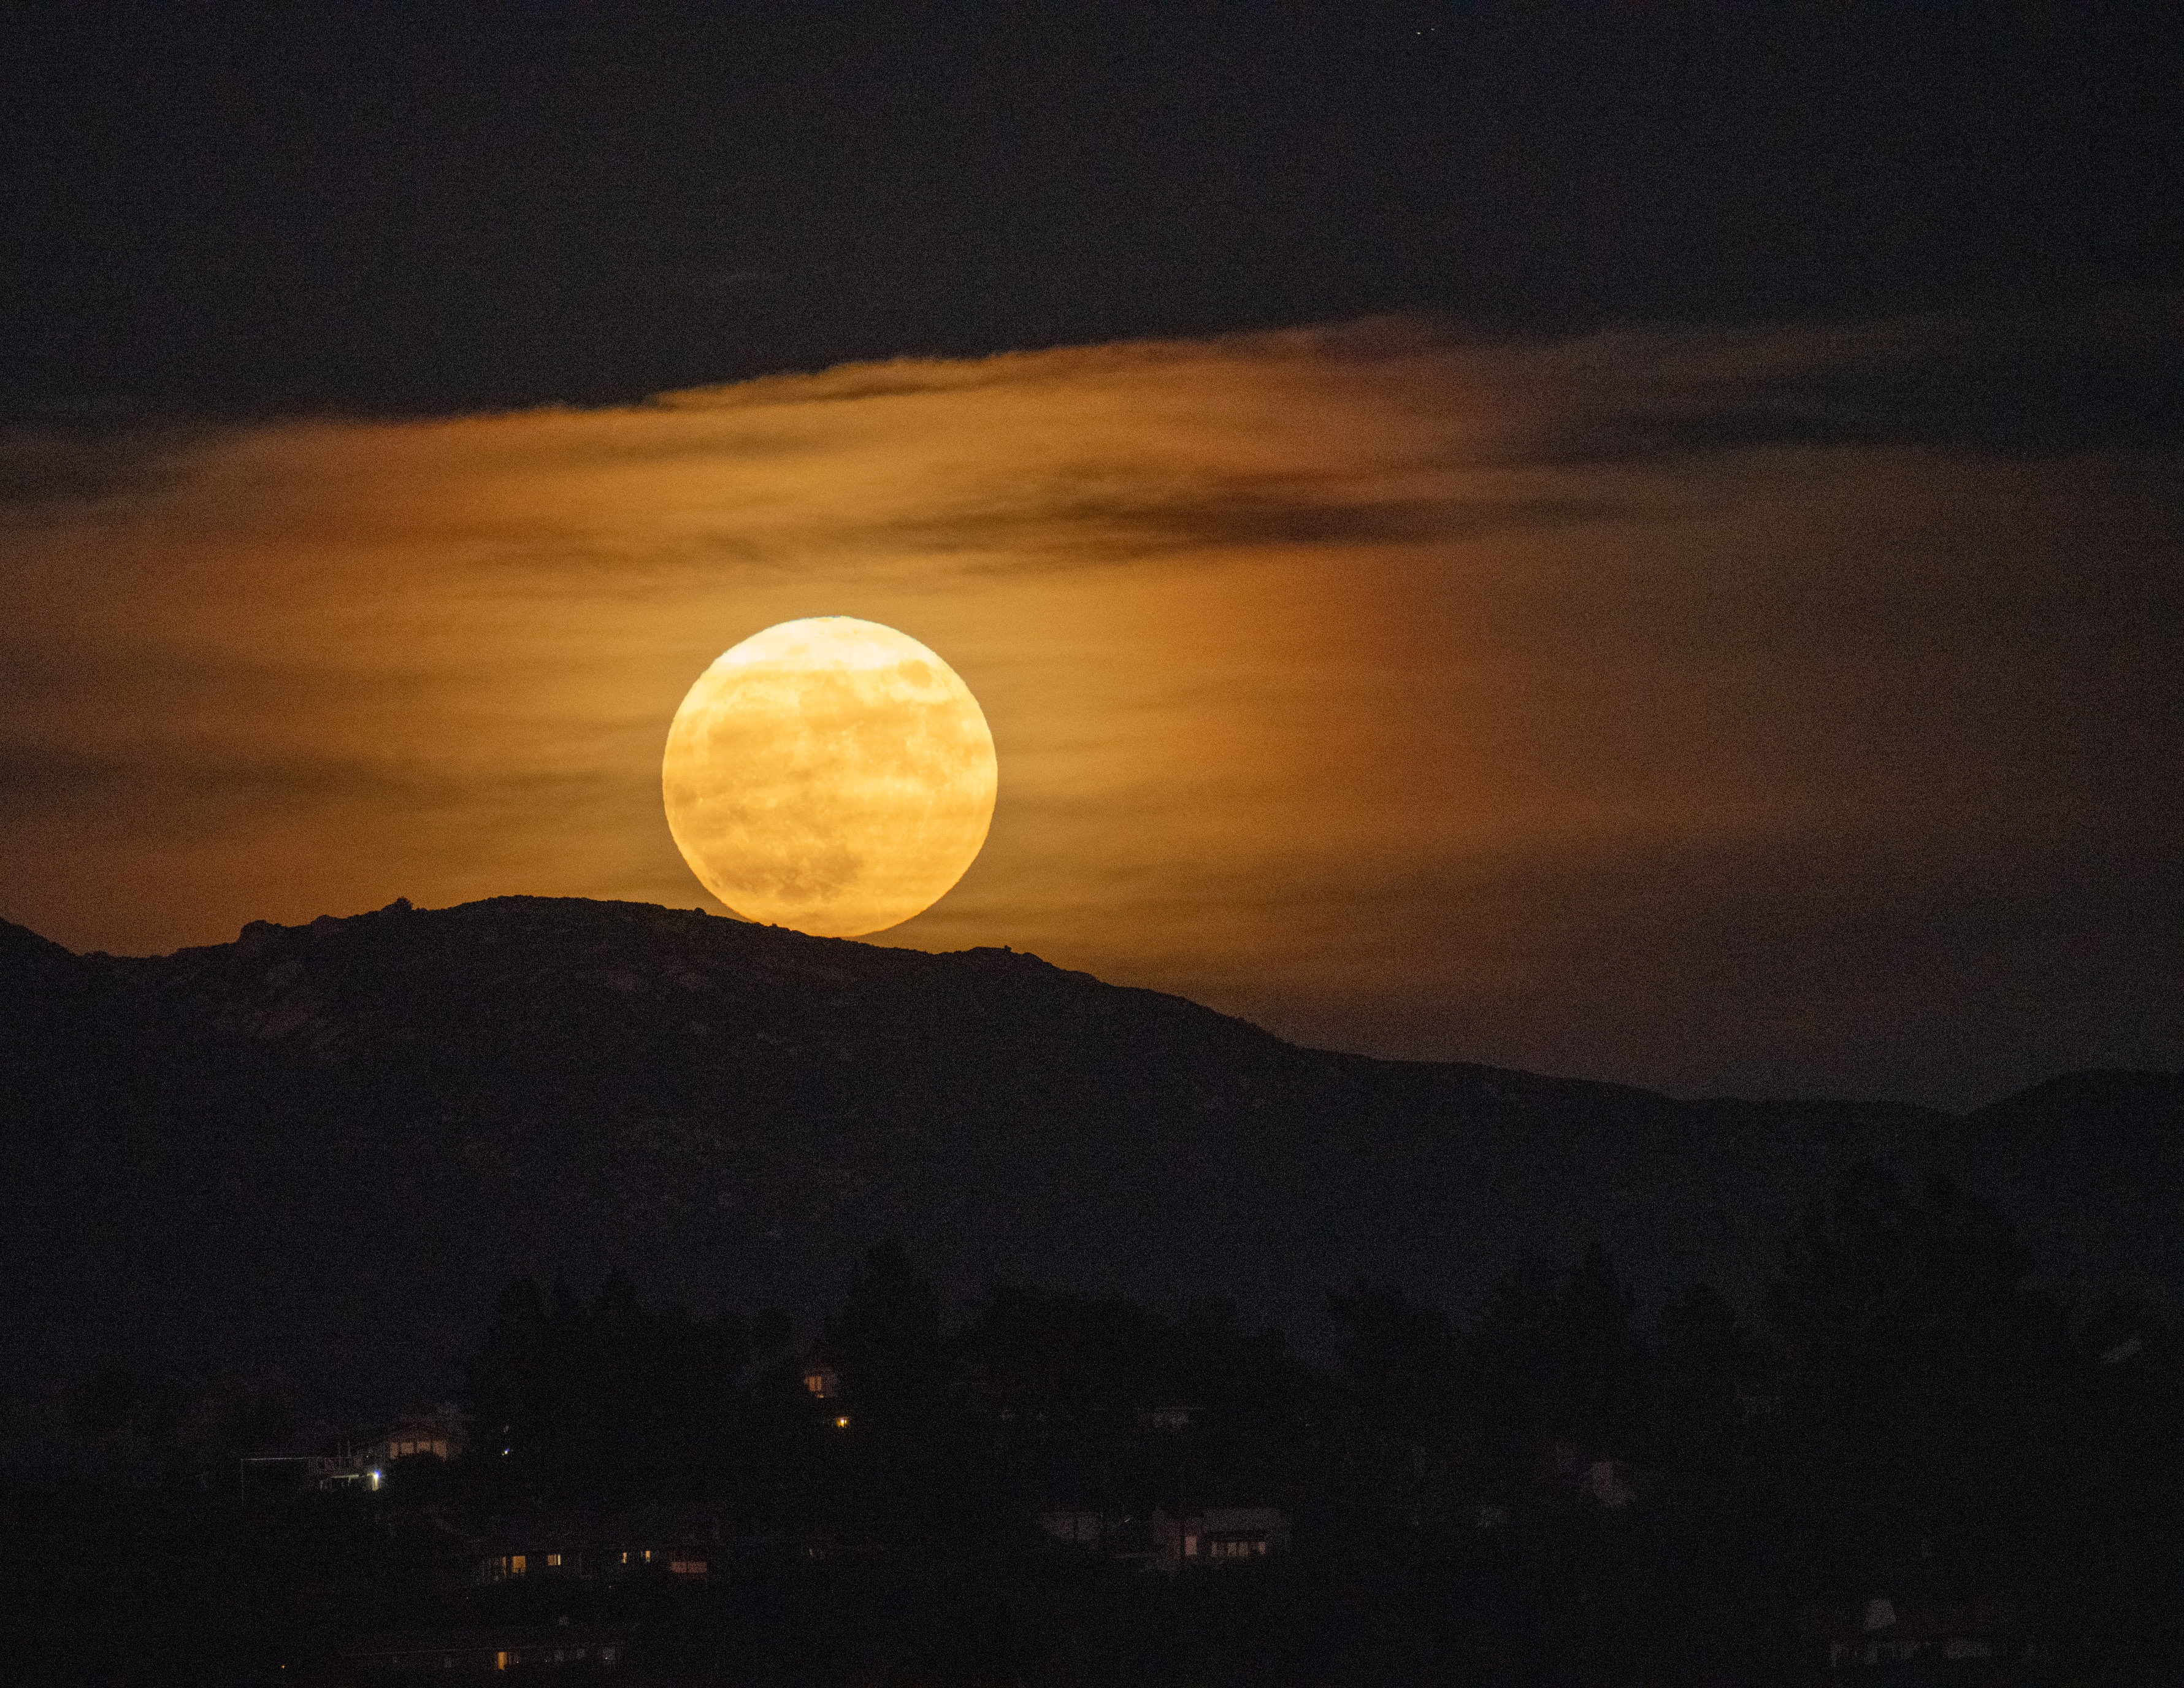 Linda Garbo captured an image of the glowing supermoon from Rancho Bernardo.